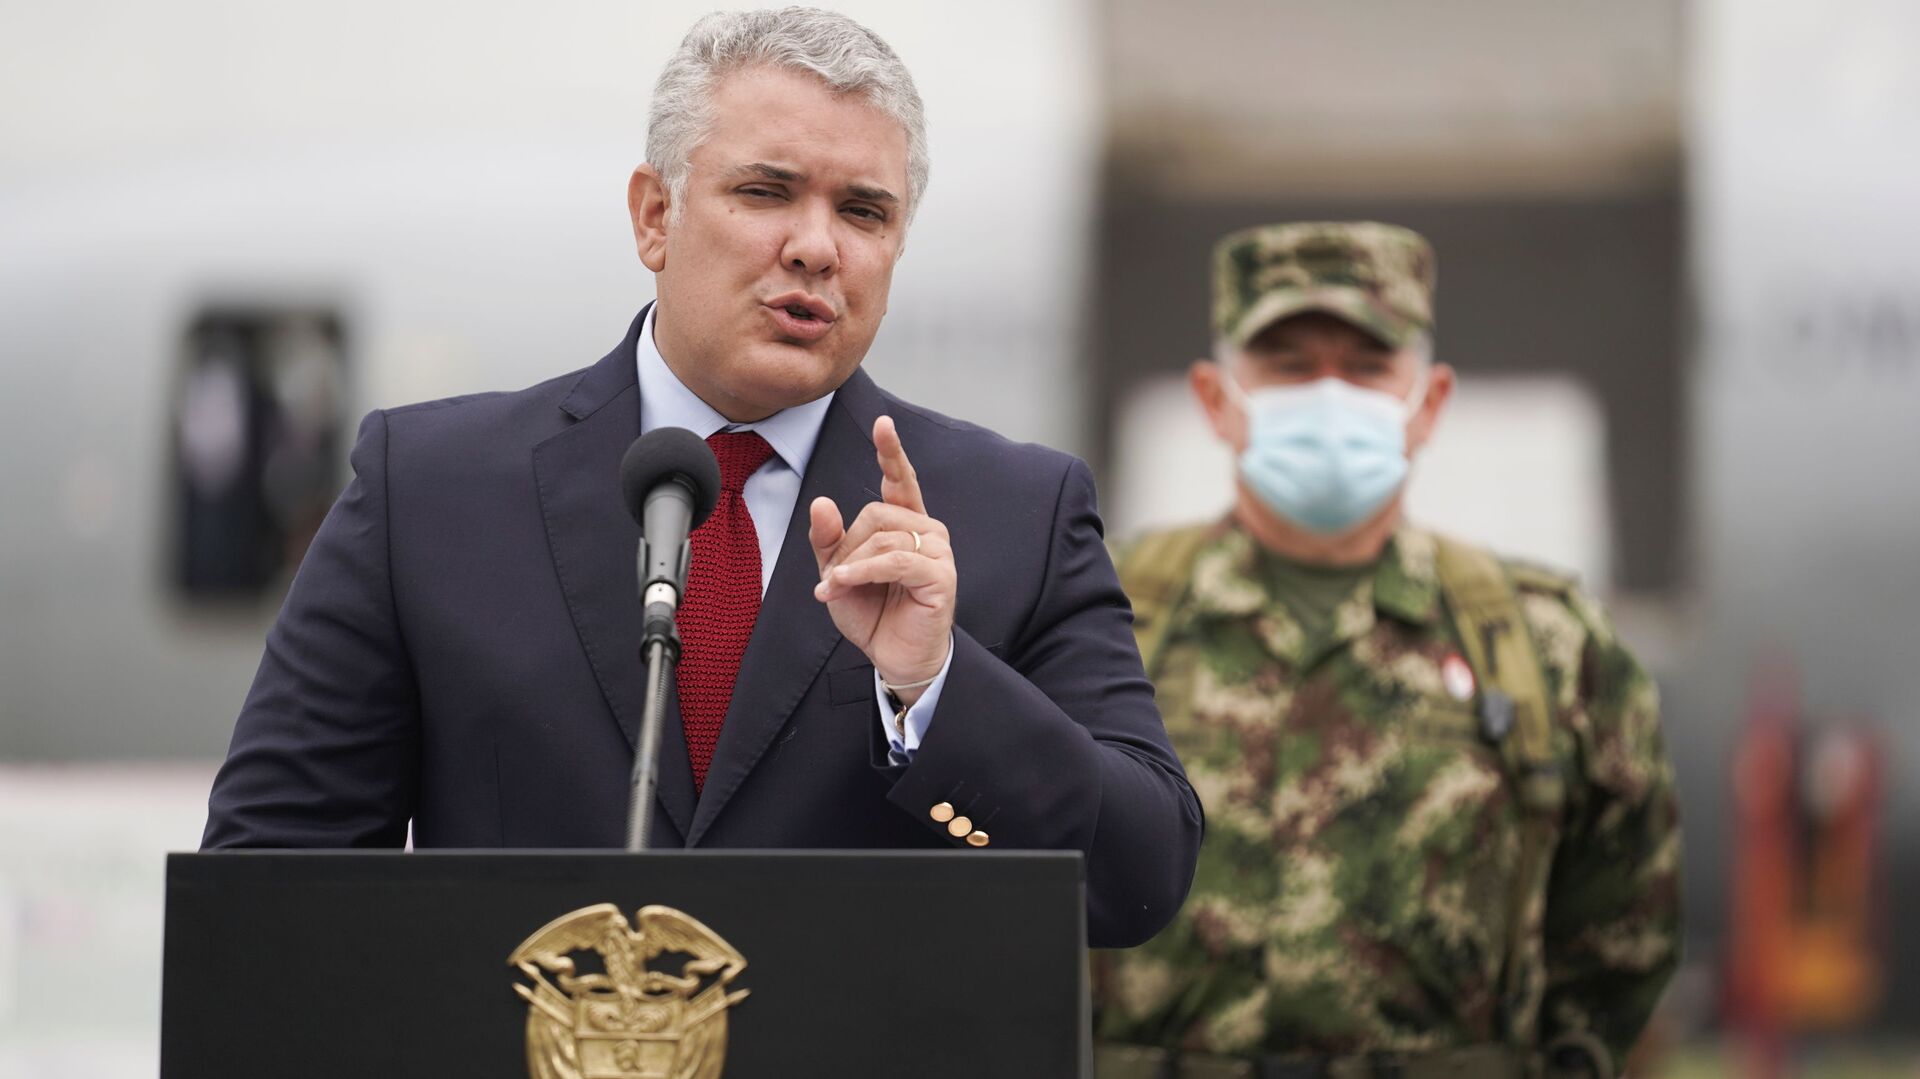 Colombia's President Ivan Duque speaks after the arrival of a shipment of Johnson & Johnson vaccines against the coronavirus disease (COVID-19), in Bogota, Colombia July 1, 2021. - Sputnik International, 1920, 15.07.2021